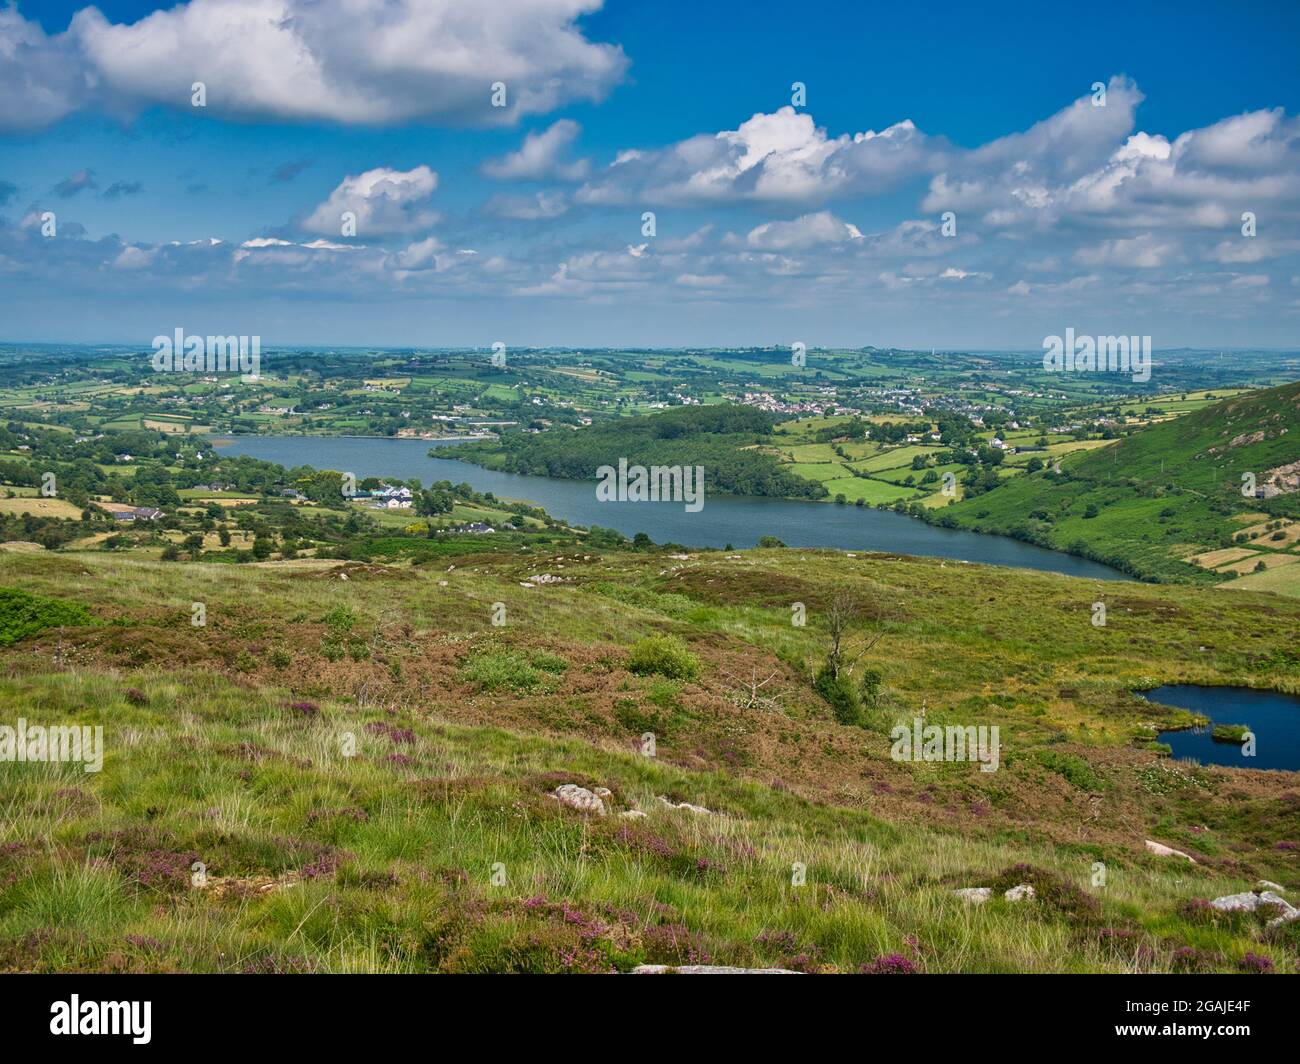 The disused reservoir of Camlough, managed by Newry and Mourne Council. Taken from a viewpoint on a route to Slieve Gullion Forest Park. Stock Photo